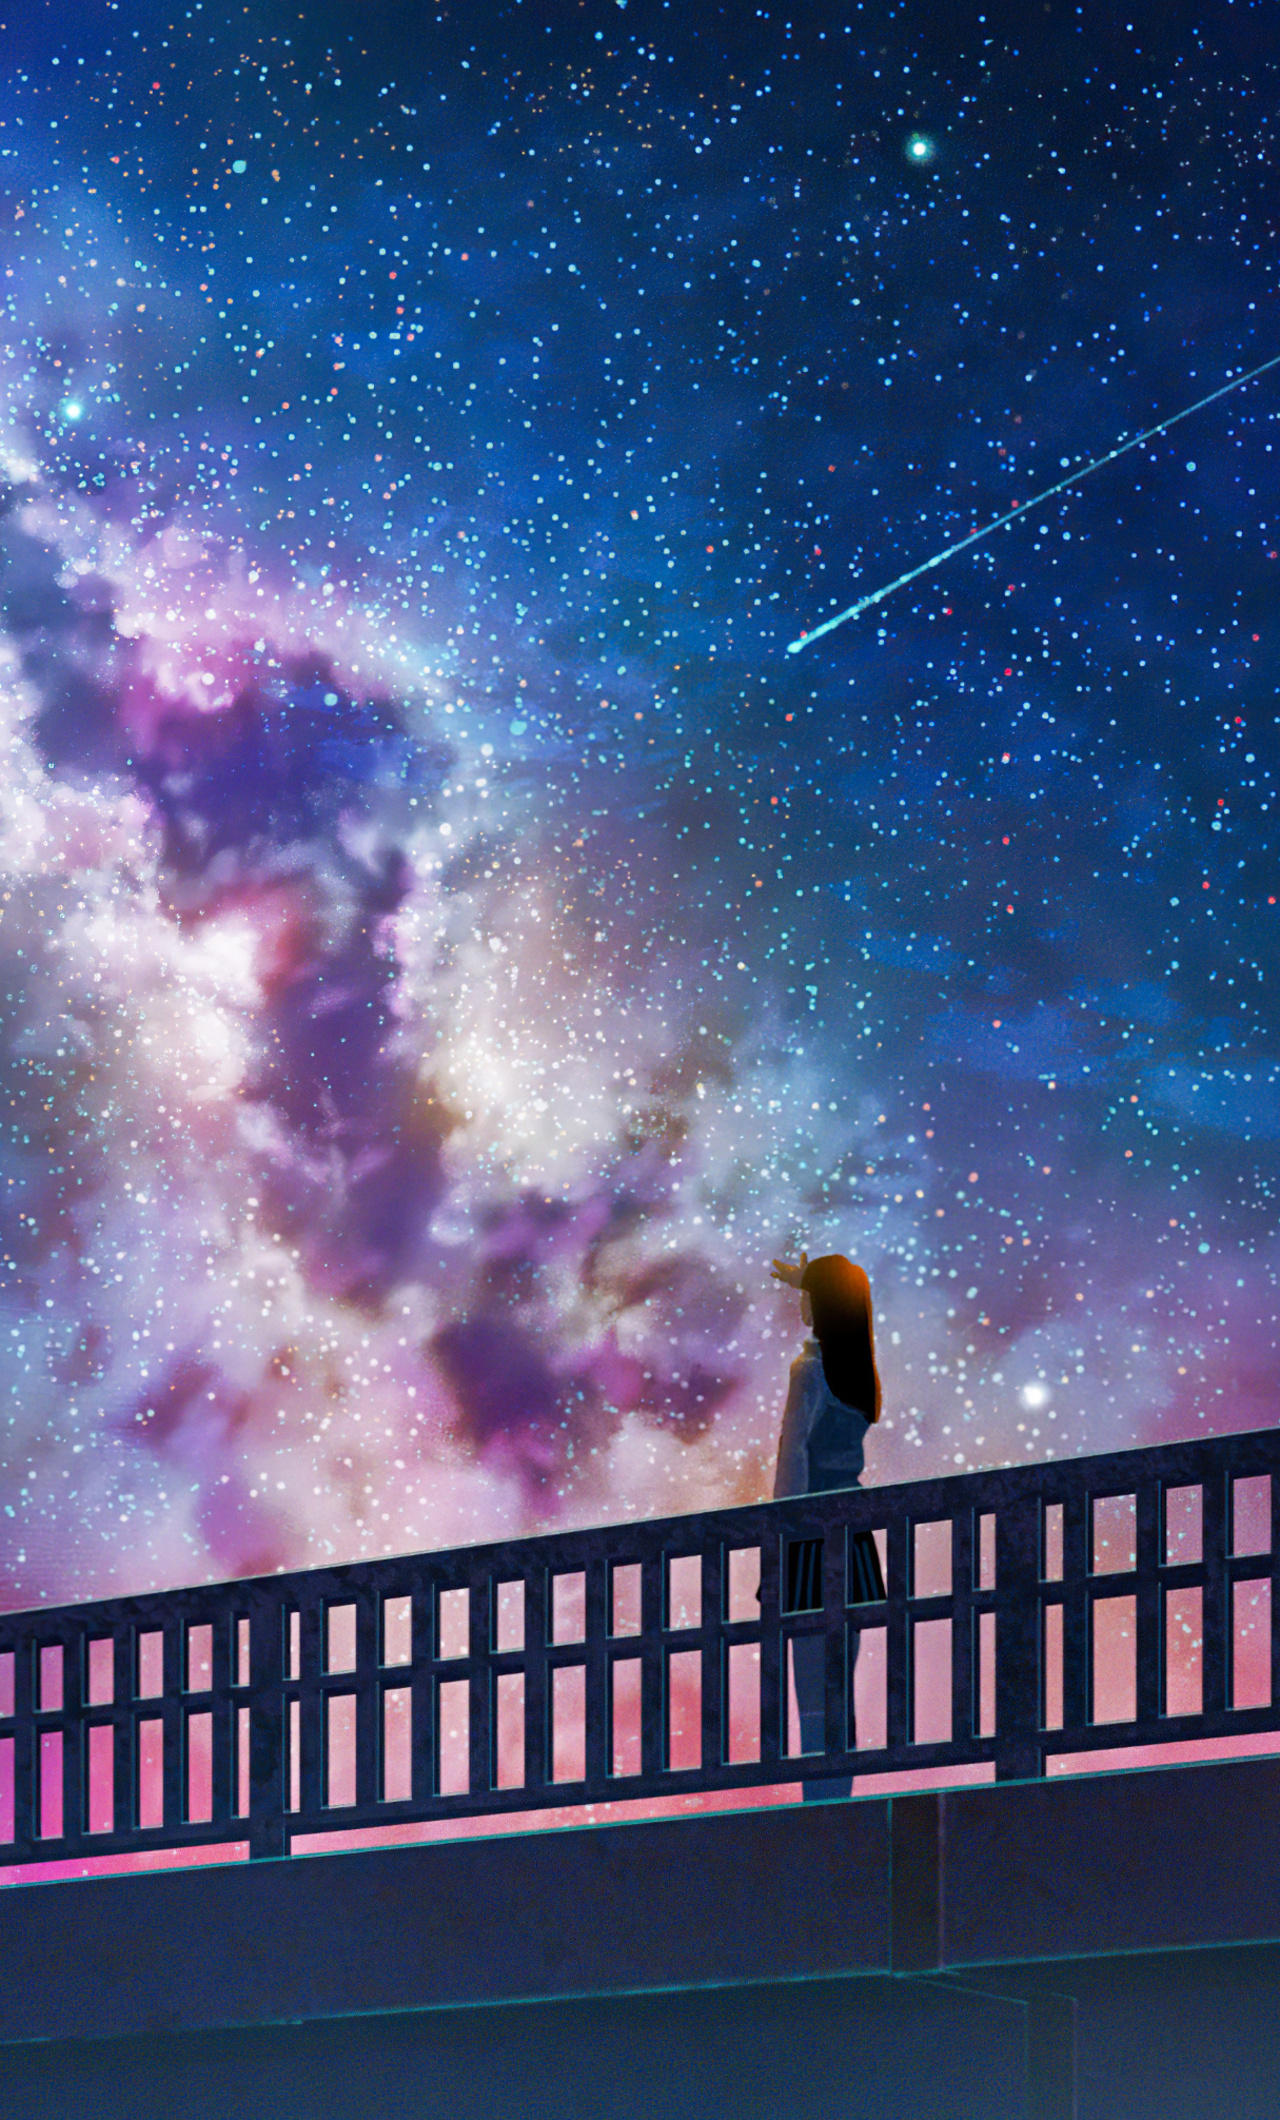 1280x2120 Anime Girl Alone At Bridge Watching The Galaxy Full Of Stars 4k  iPhone 6+ HD 4k Wallpapers, Images, Backgrounds, Photos and Pictures